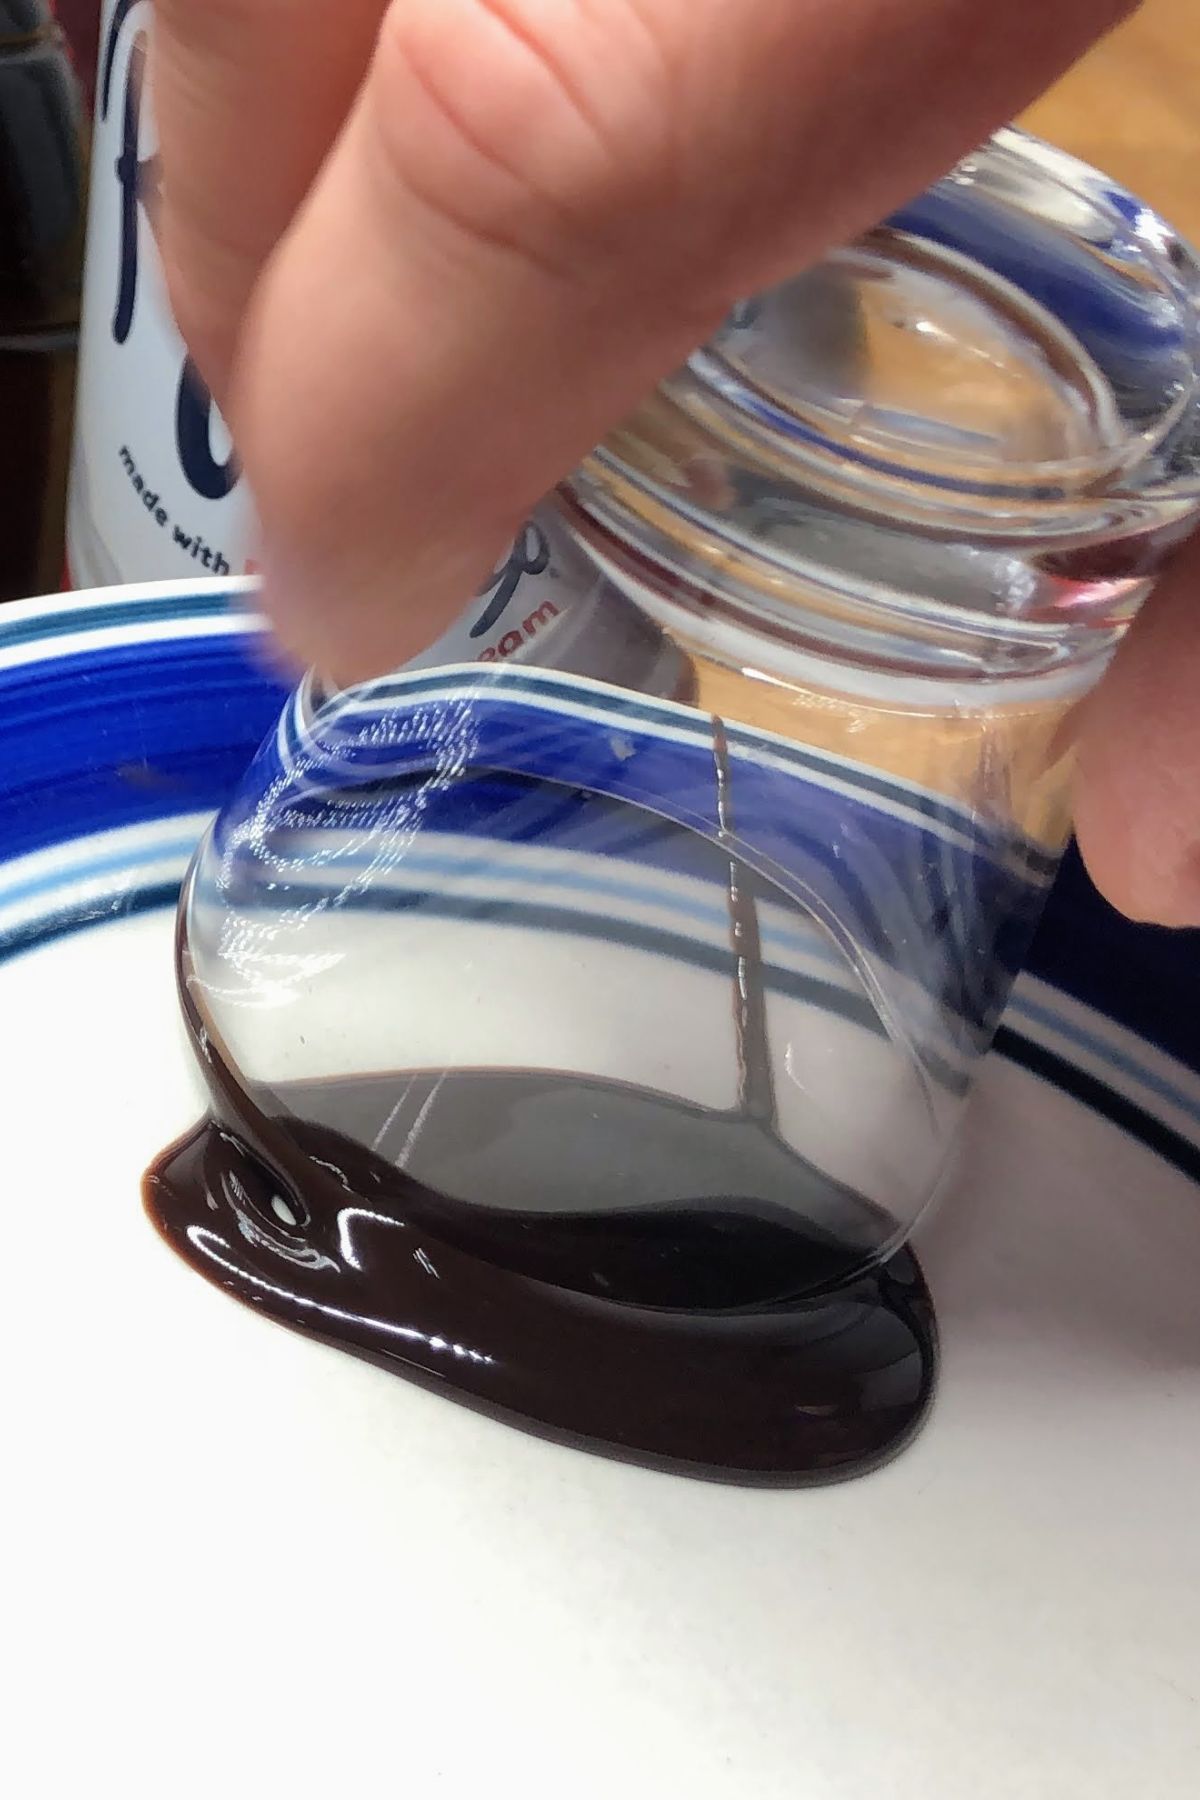 Rolling a shot glass in chocolate syrup.